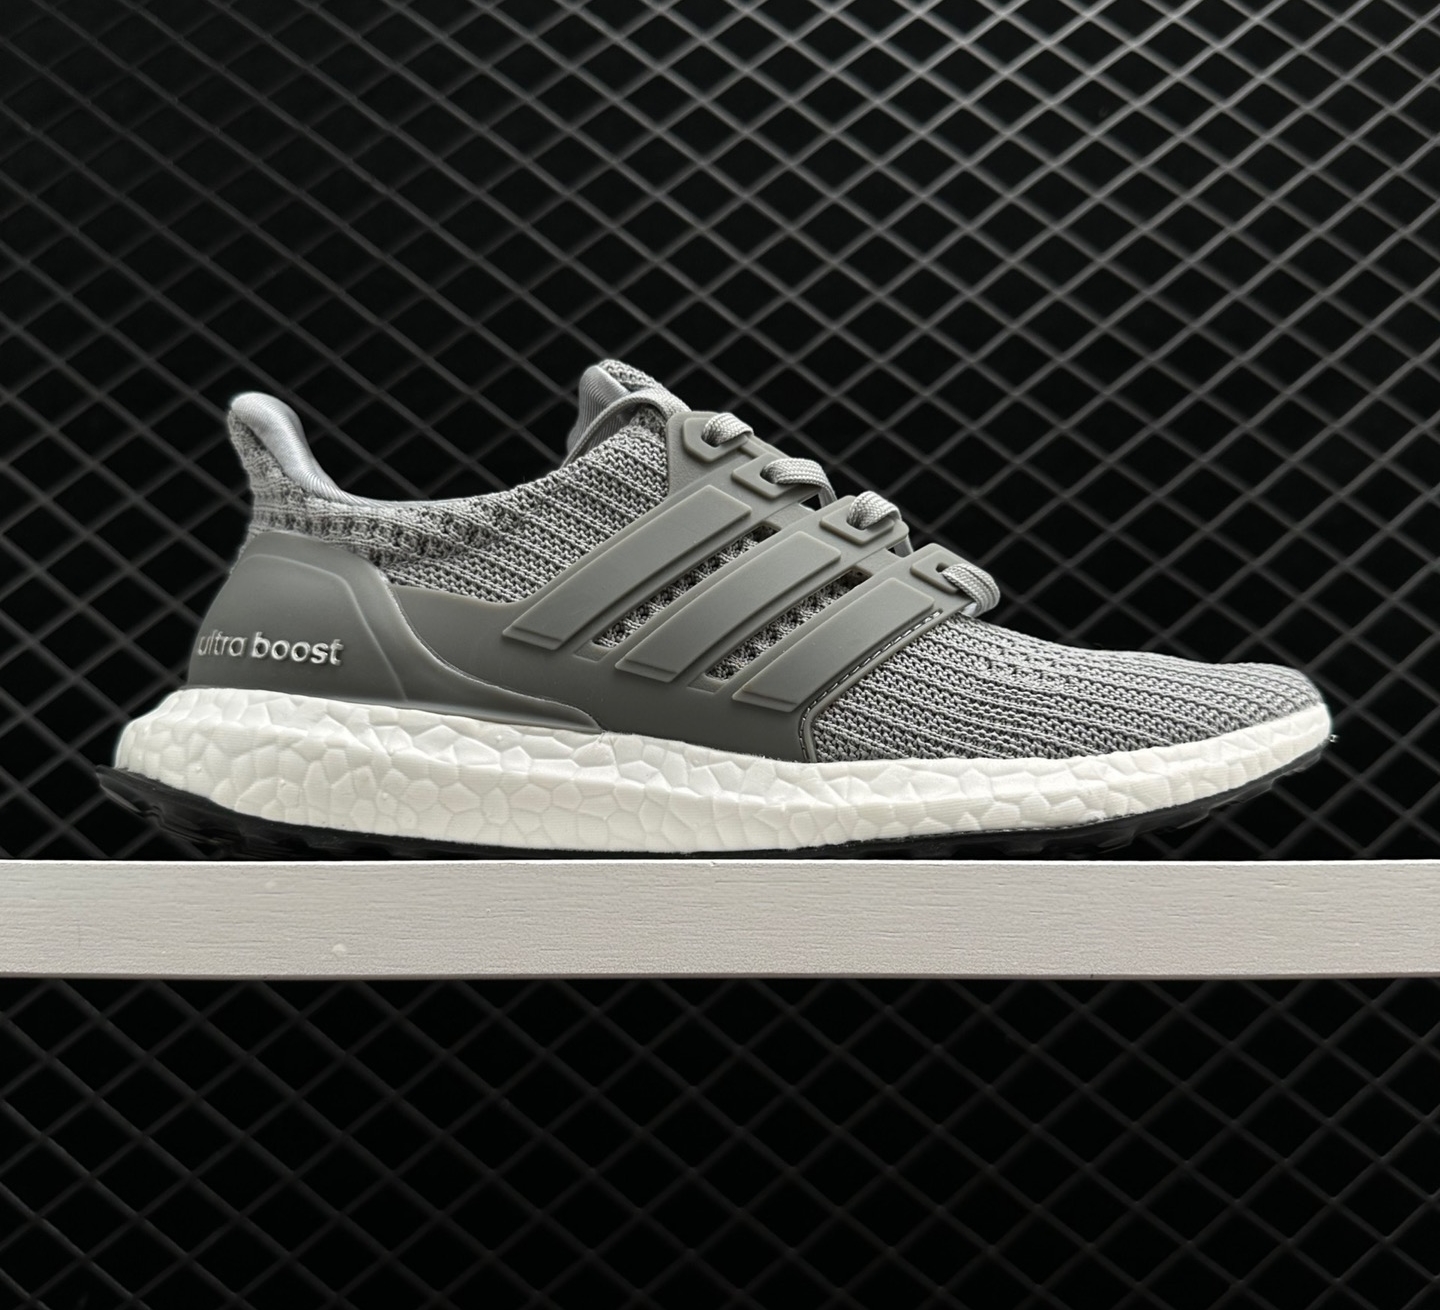 Adidas UltraBoost 4.0 'Grey' BB6150 - The Ultimate Athletic Sneaker